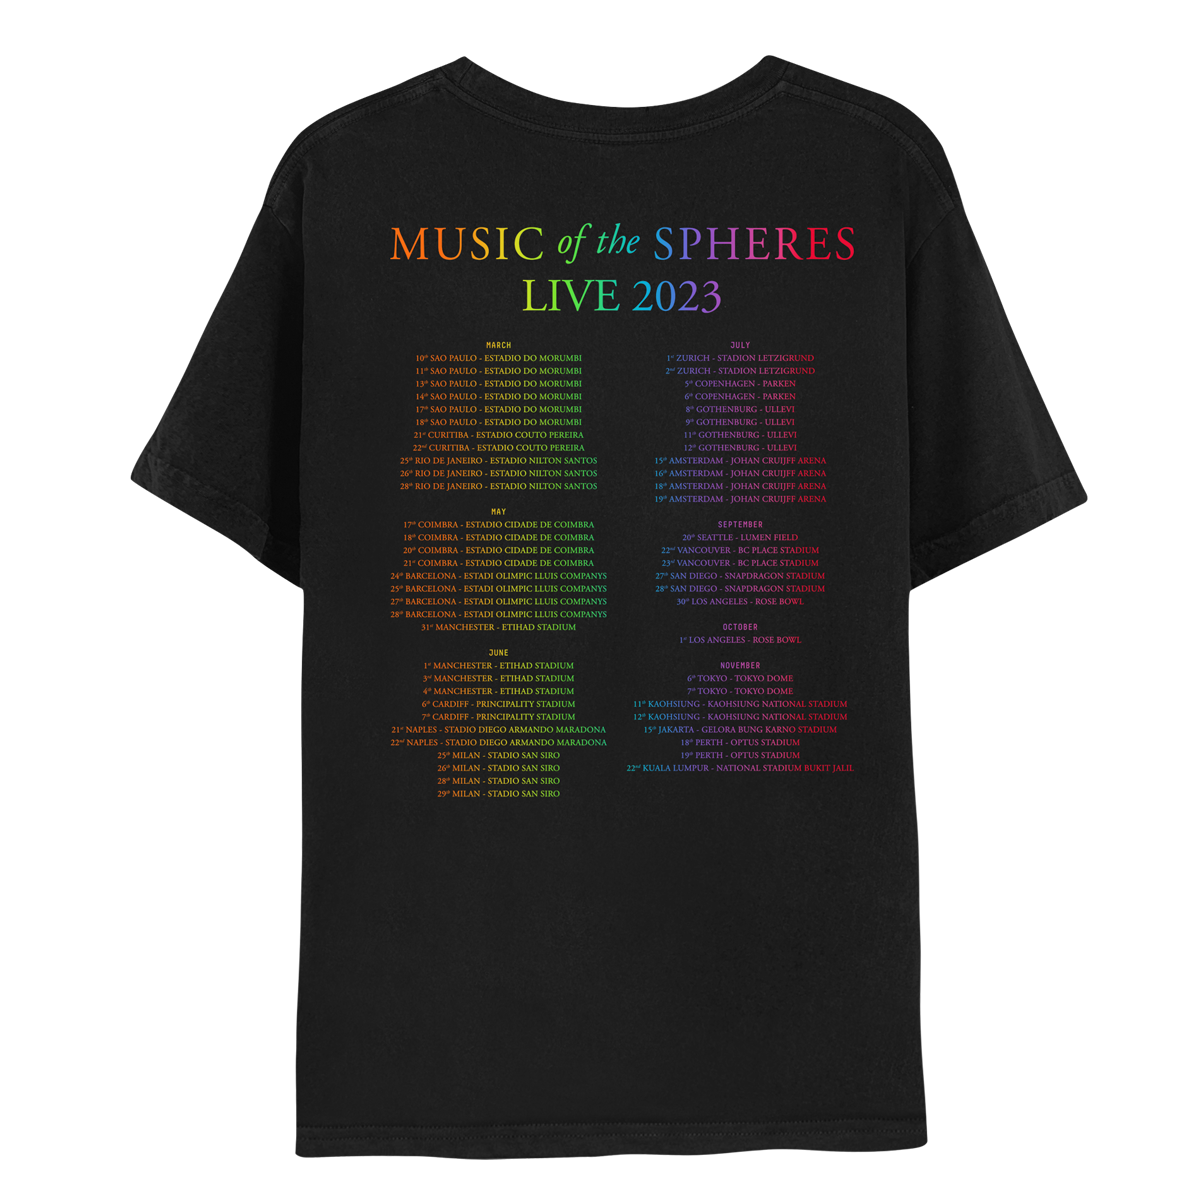 San Diego Music of the Spheres Limited Edition Tour Tee